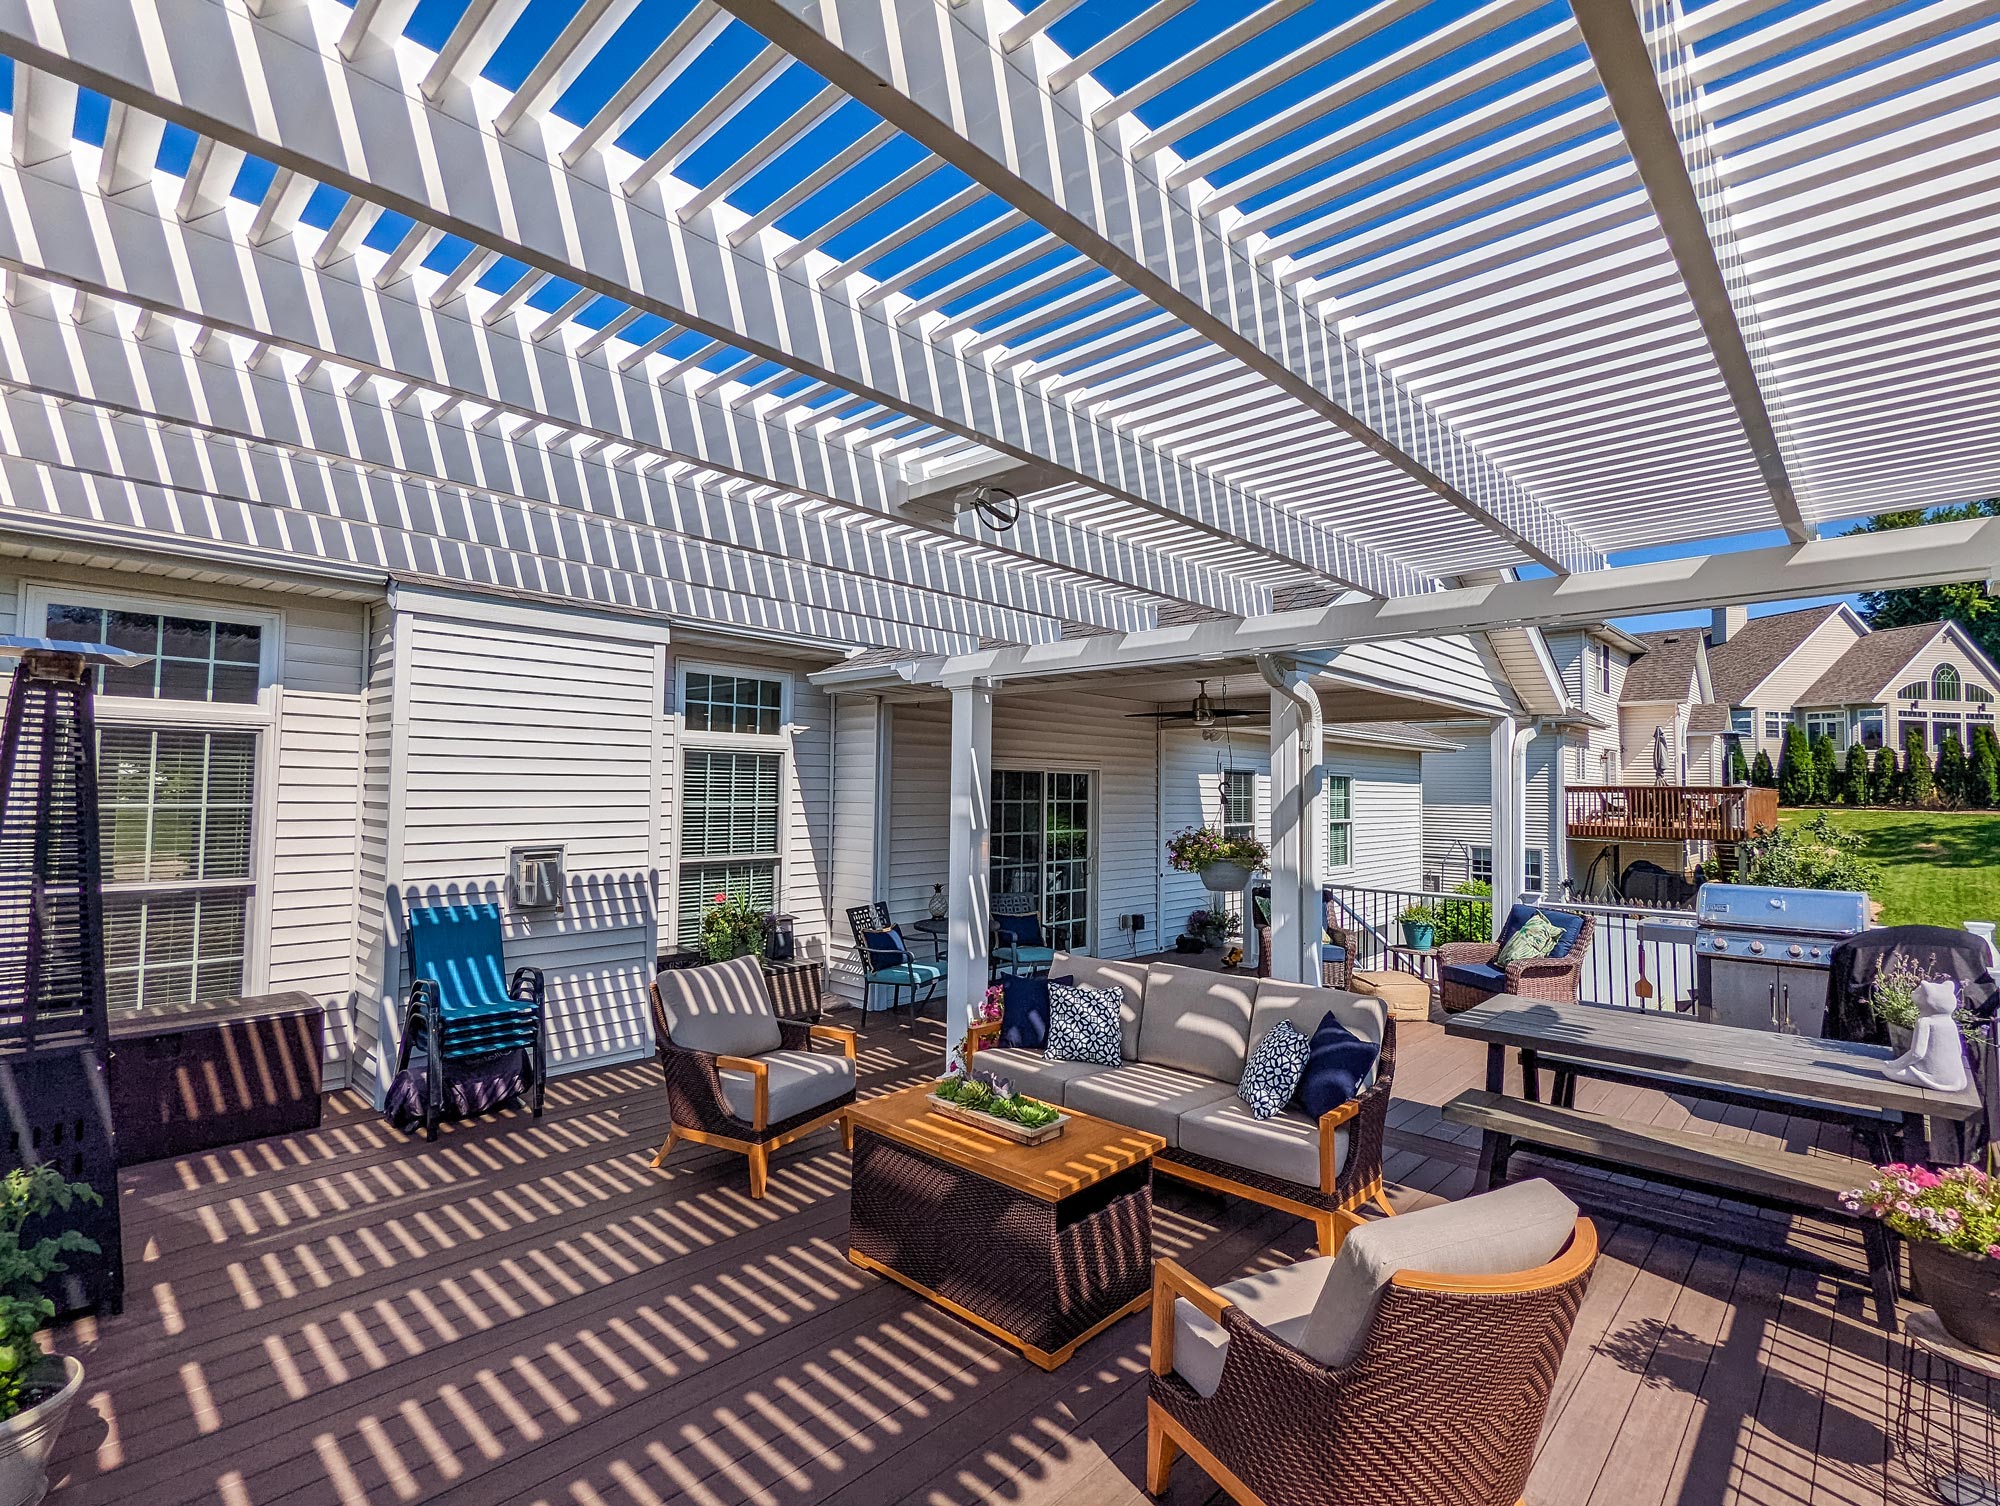 white pergola with 75% shade over a deck with outdoor furniture and fire table